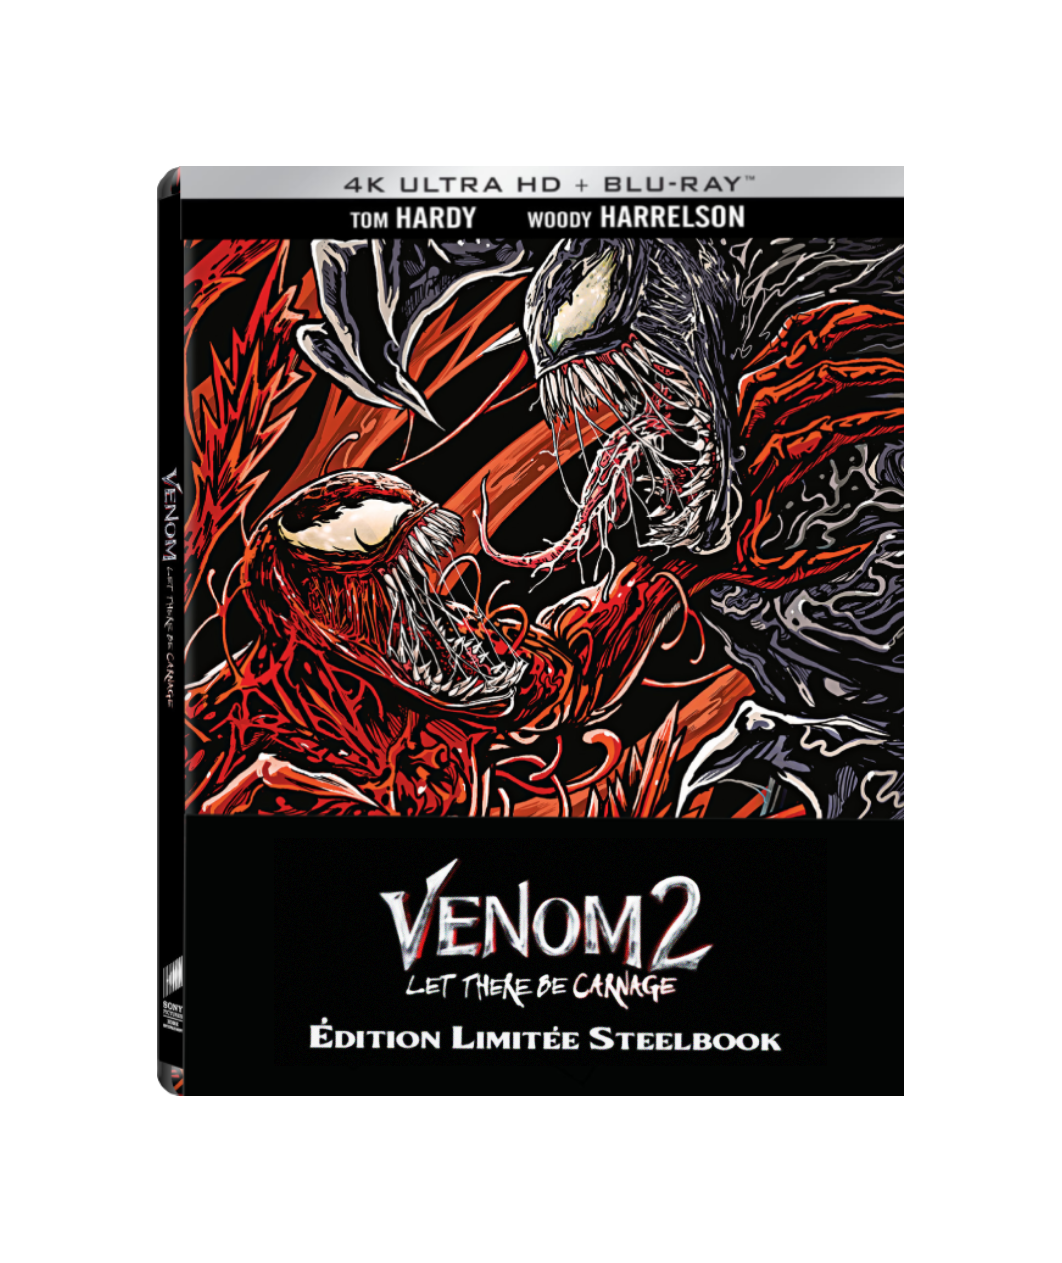 VENOM 2 : LET THERE BE CARNAGE - COMBO 4K UHD + BD - STEELBOOK EDITION LIMITEE